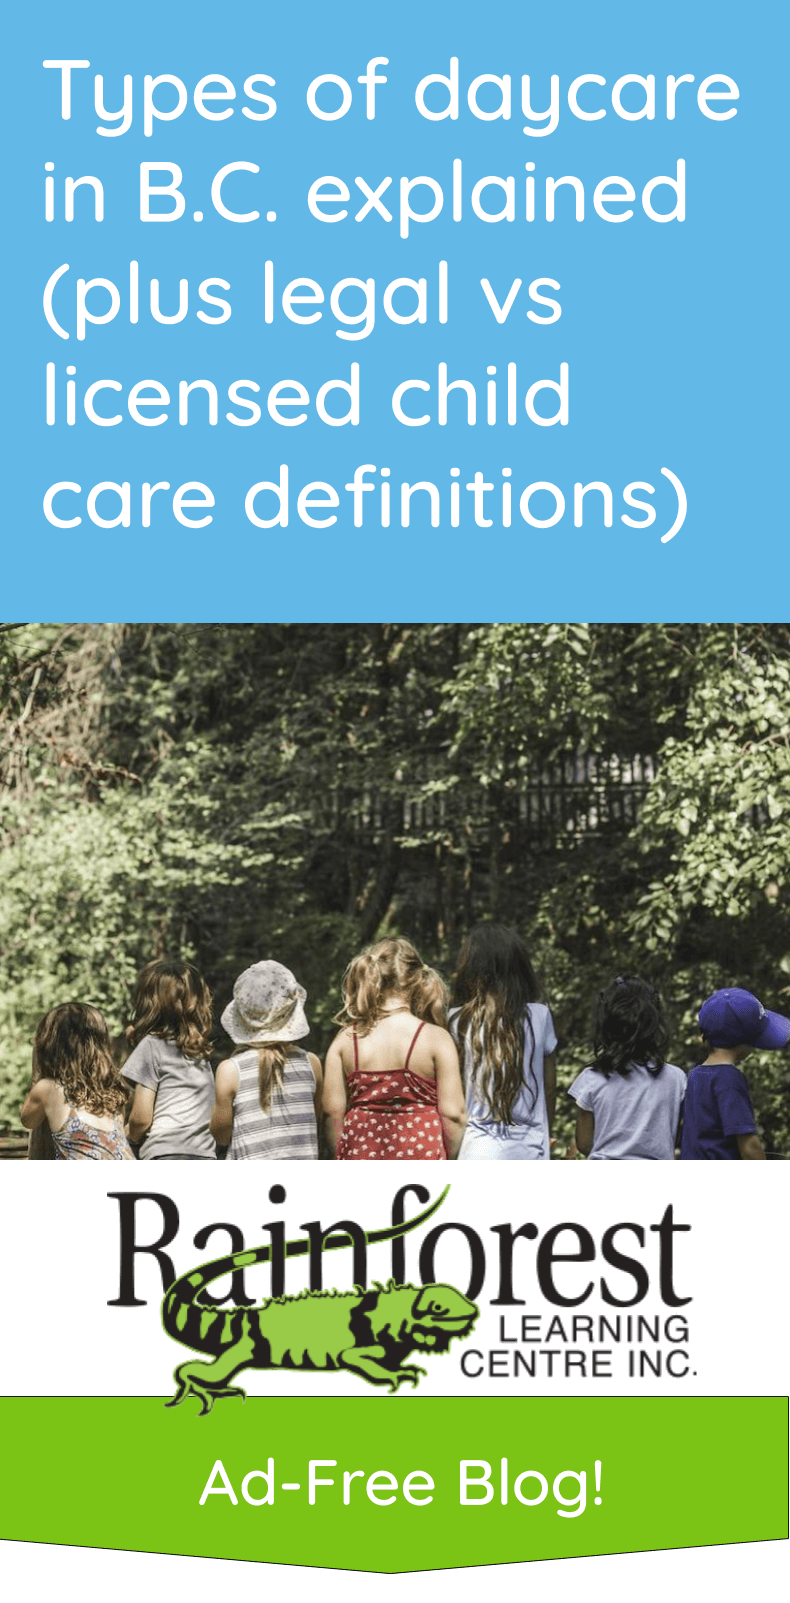 Types of daycare in B.C. explained plus legal vs licensed child care definitions - article pinterest image